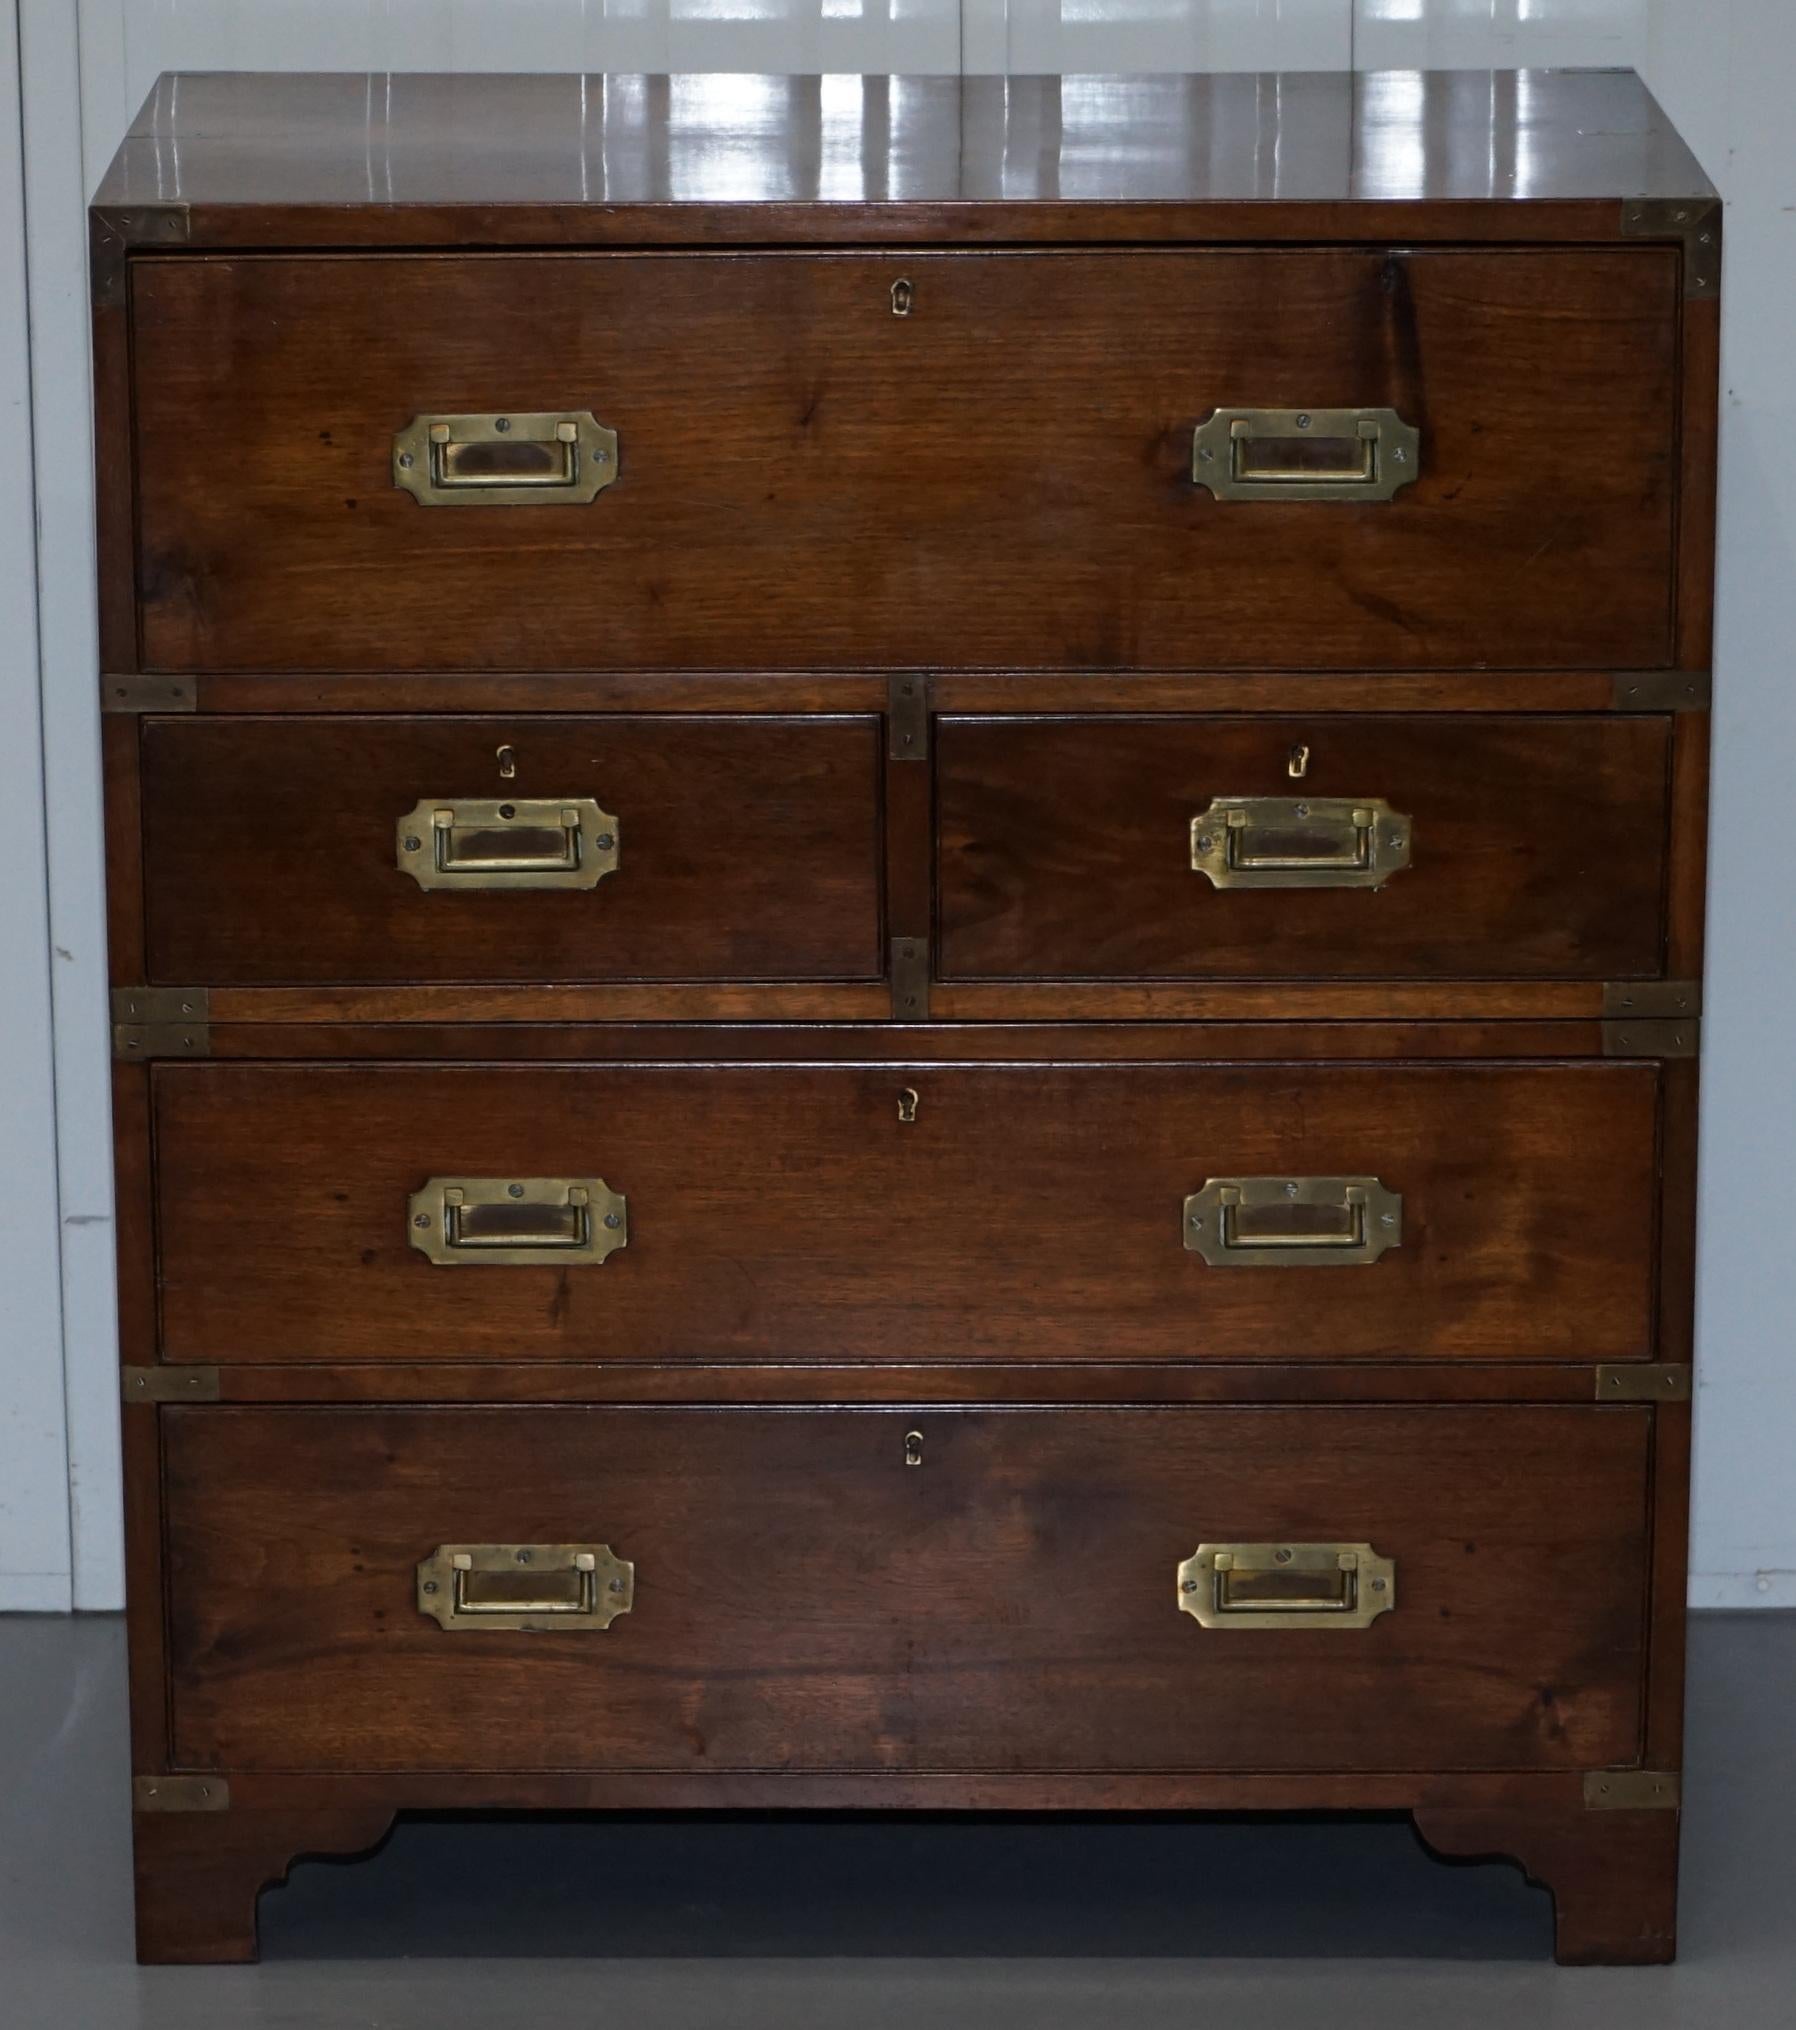 Victorian Military Campaign Chest of Drawers Built in Secrataire Drop Front Desk (Kampagne)